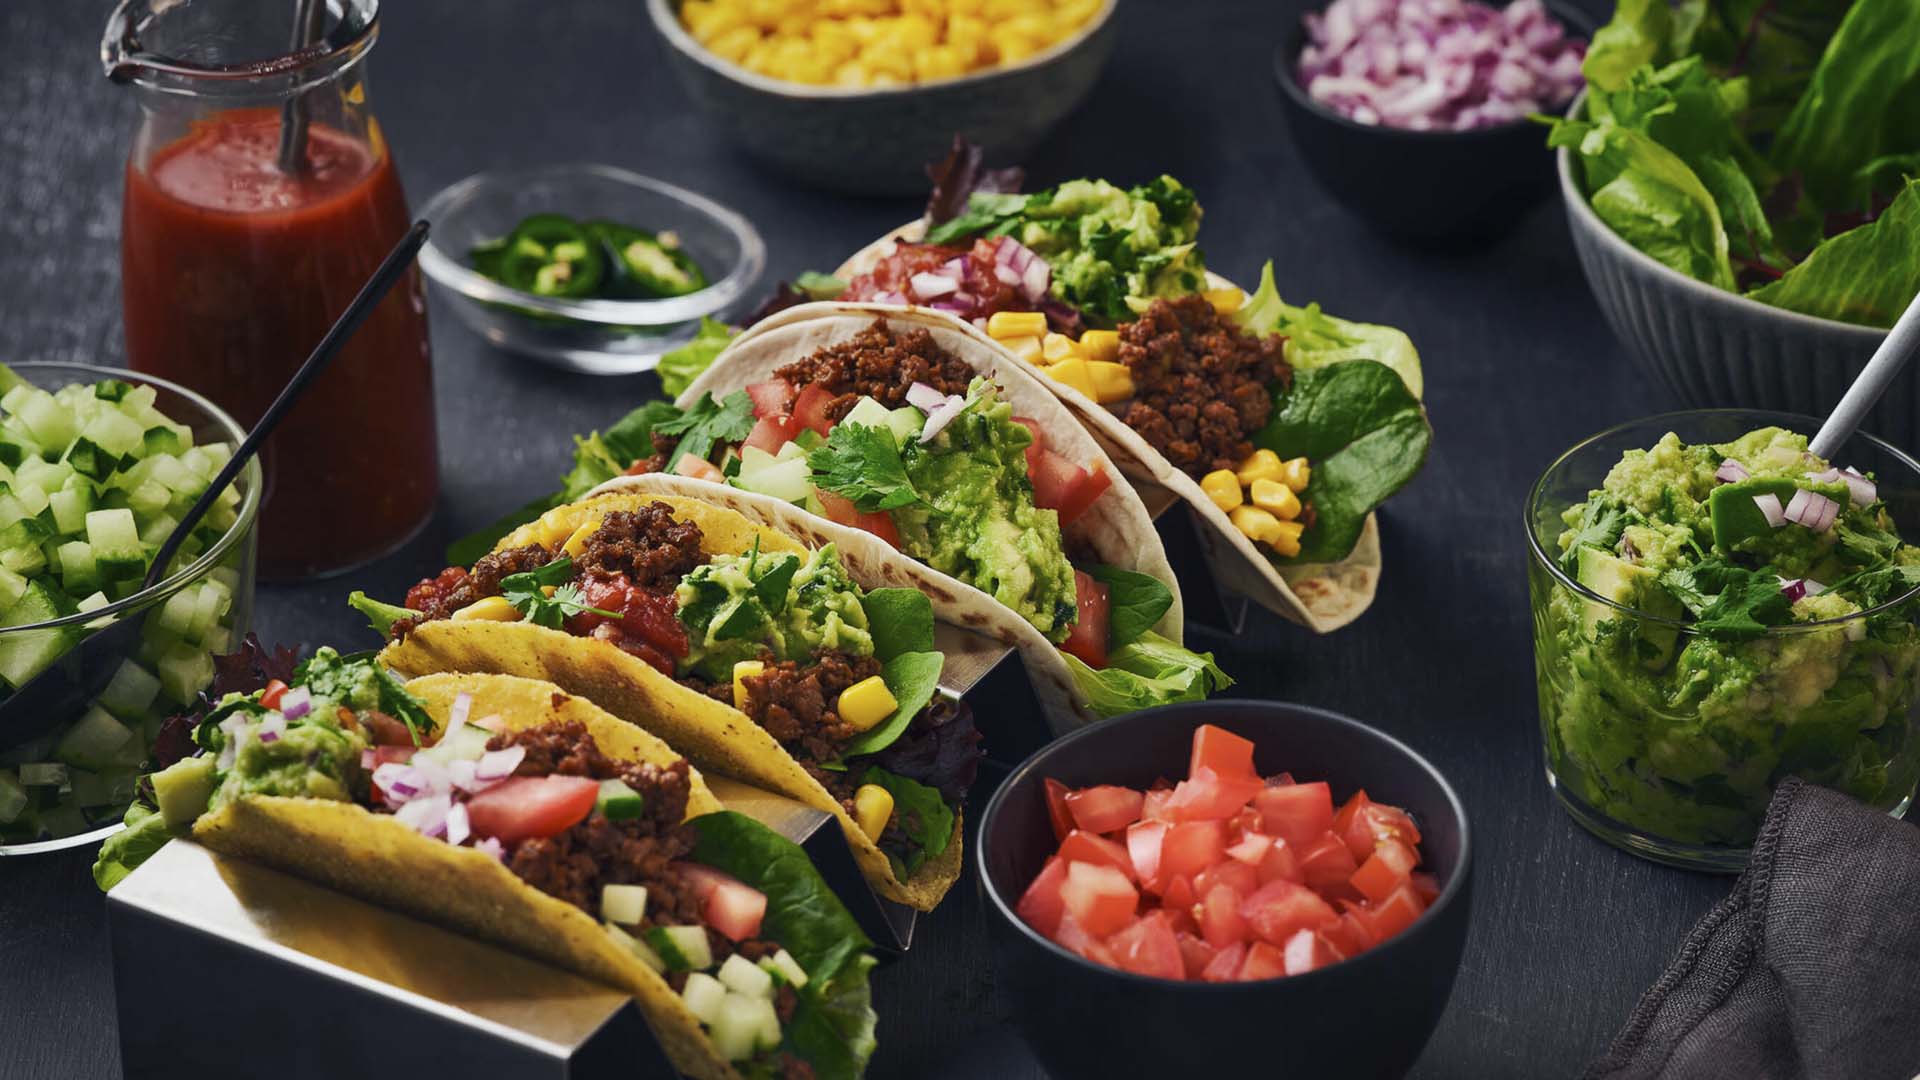 Tacos have taken the Nordics by storm